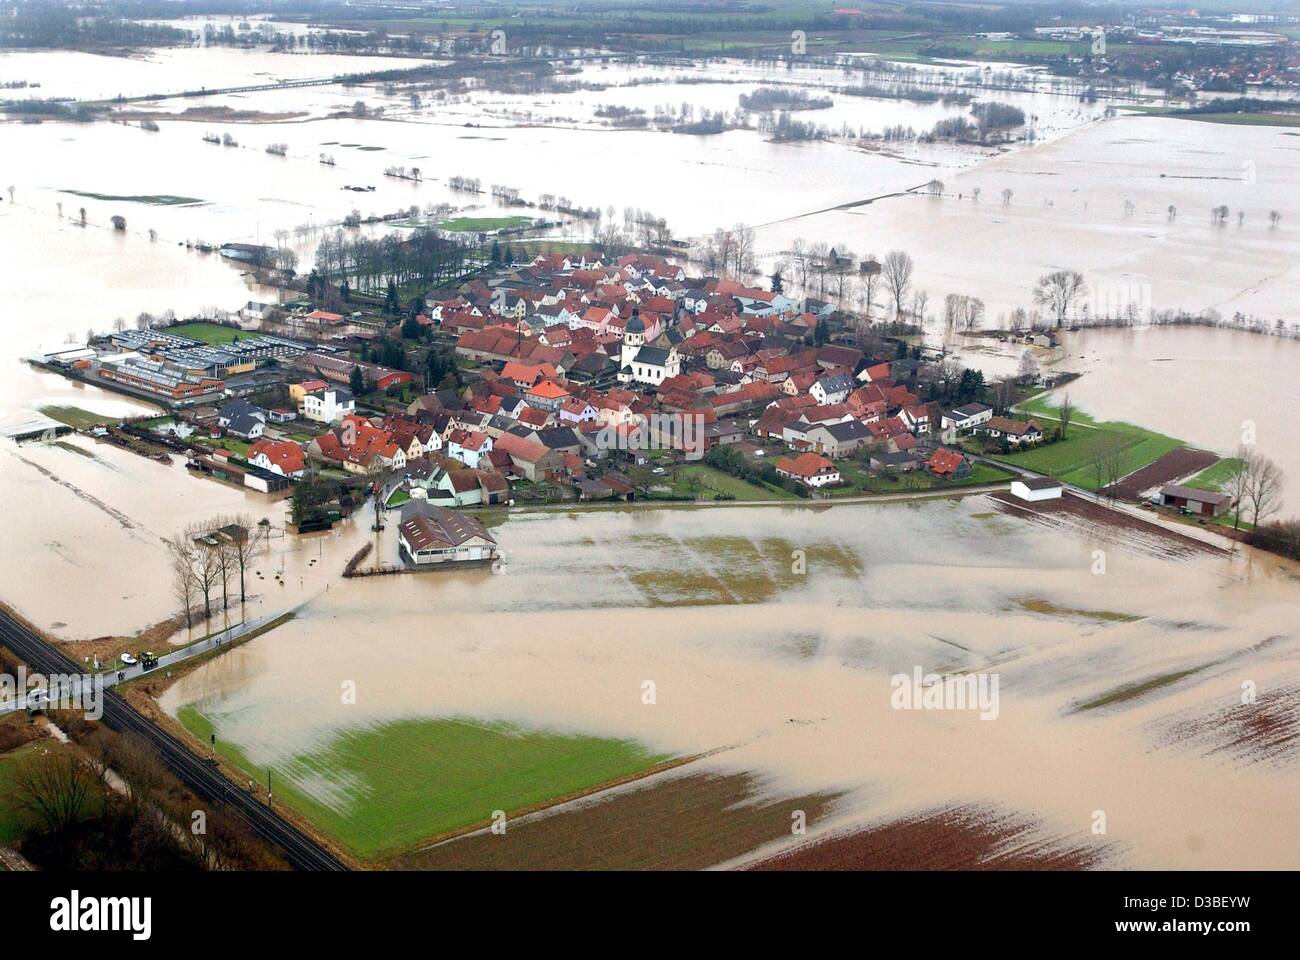 (dpa) - The village of Augsfeld is surrounded by floodwaters in Bavaria, Germany, 4 January 2003. Flood alerts were issued along Germany's main rivers after heavy rain sent water levels surging. But levels are rising slowlier than expected. Stock Photo